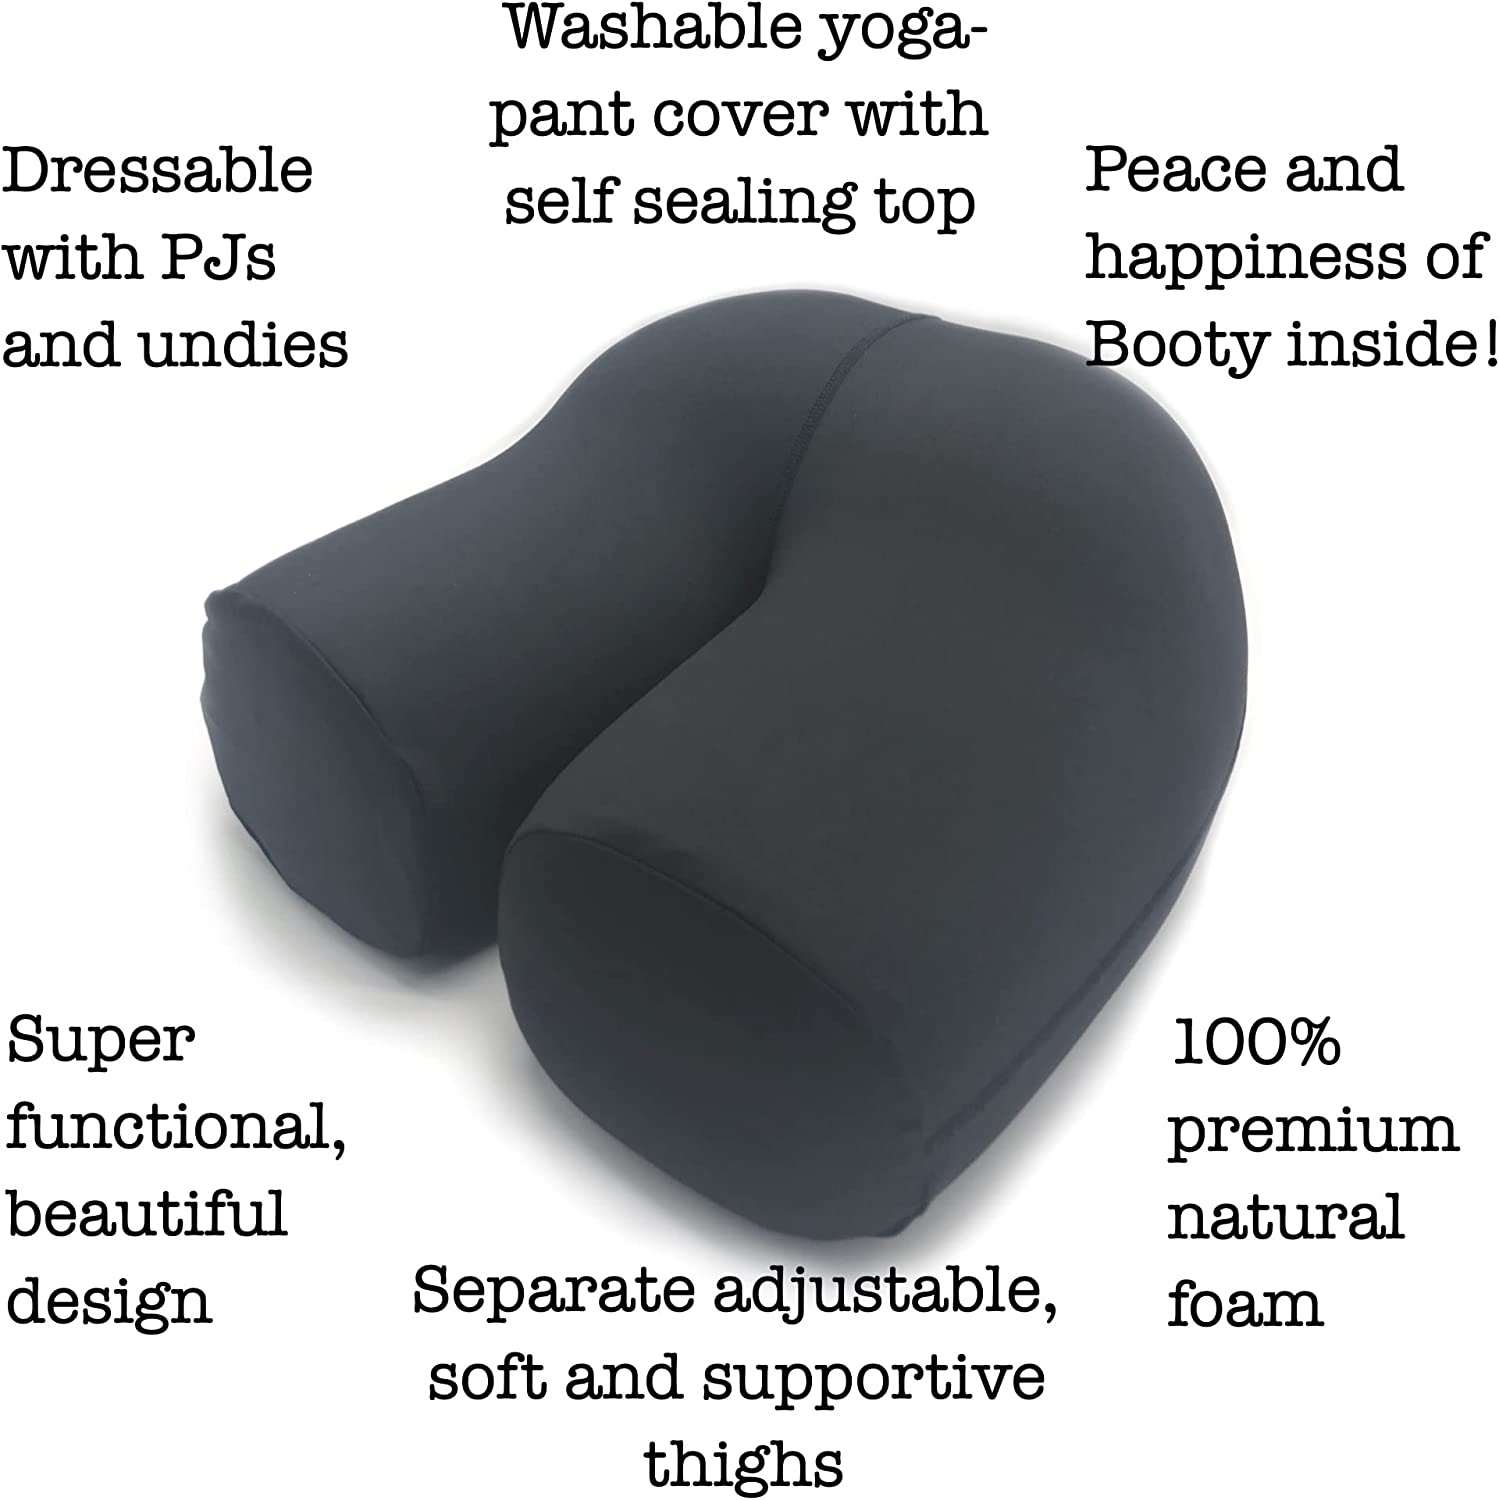 butt pillow, The World's Most Bootyful Pillow for All Kinds of